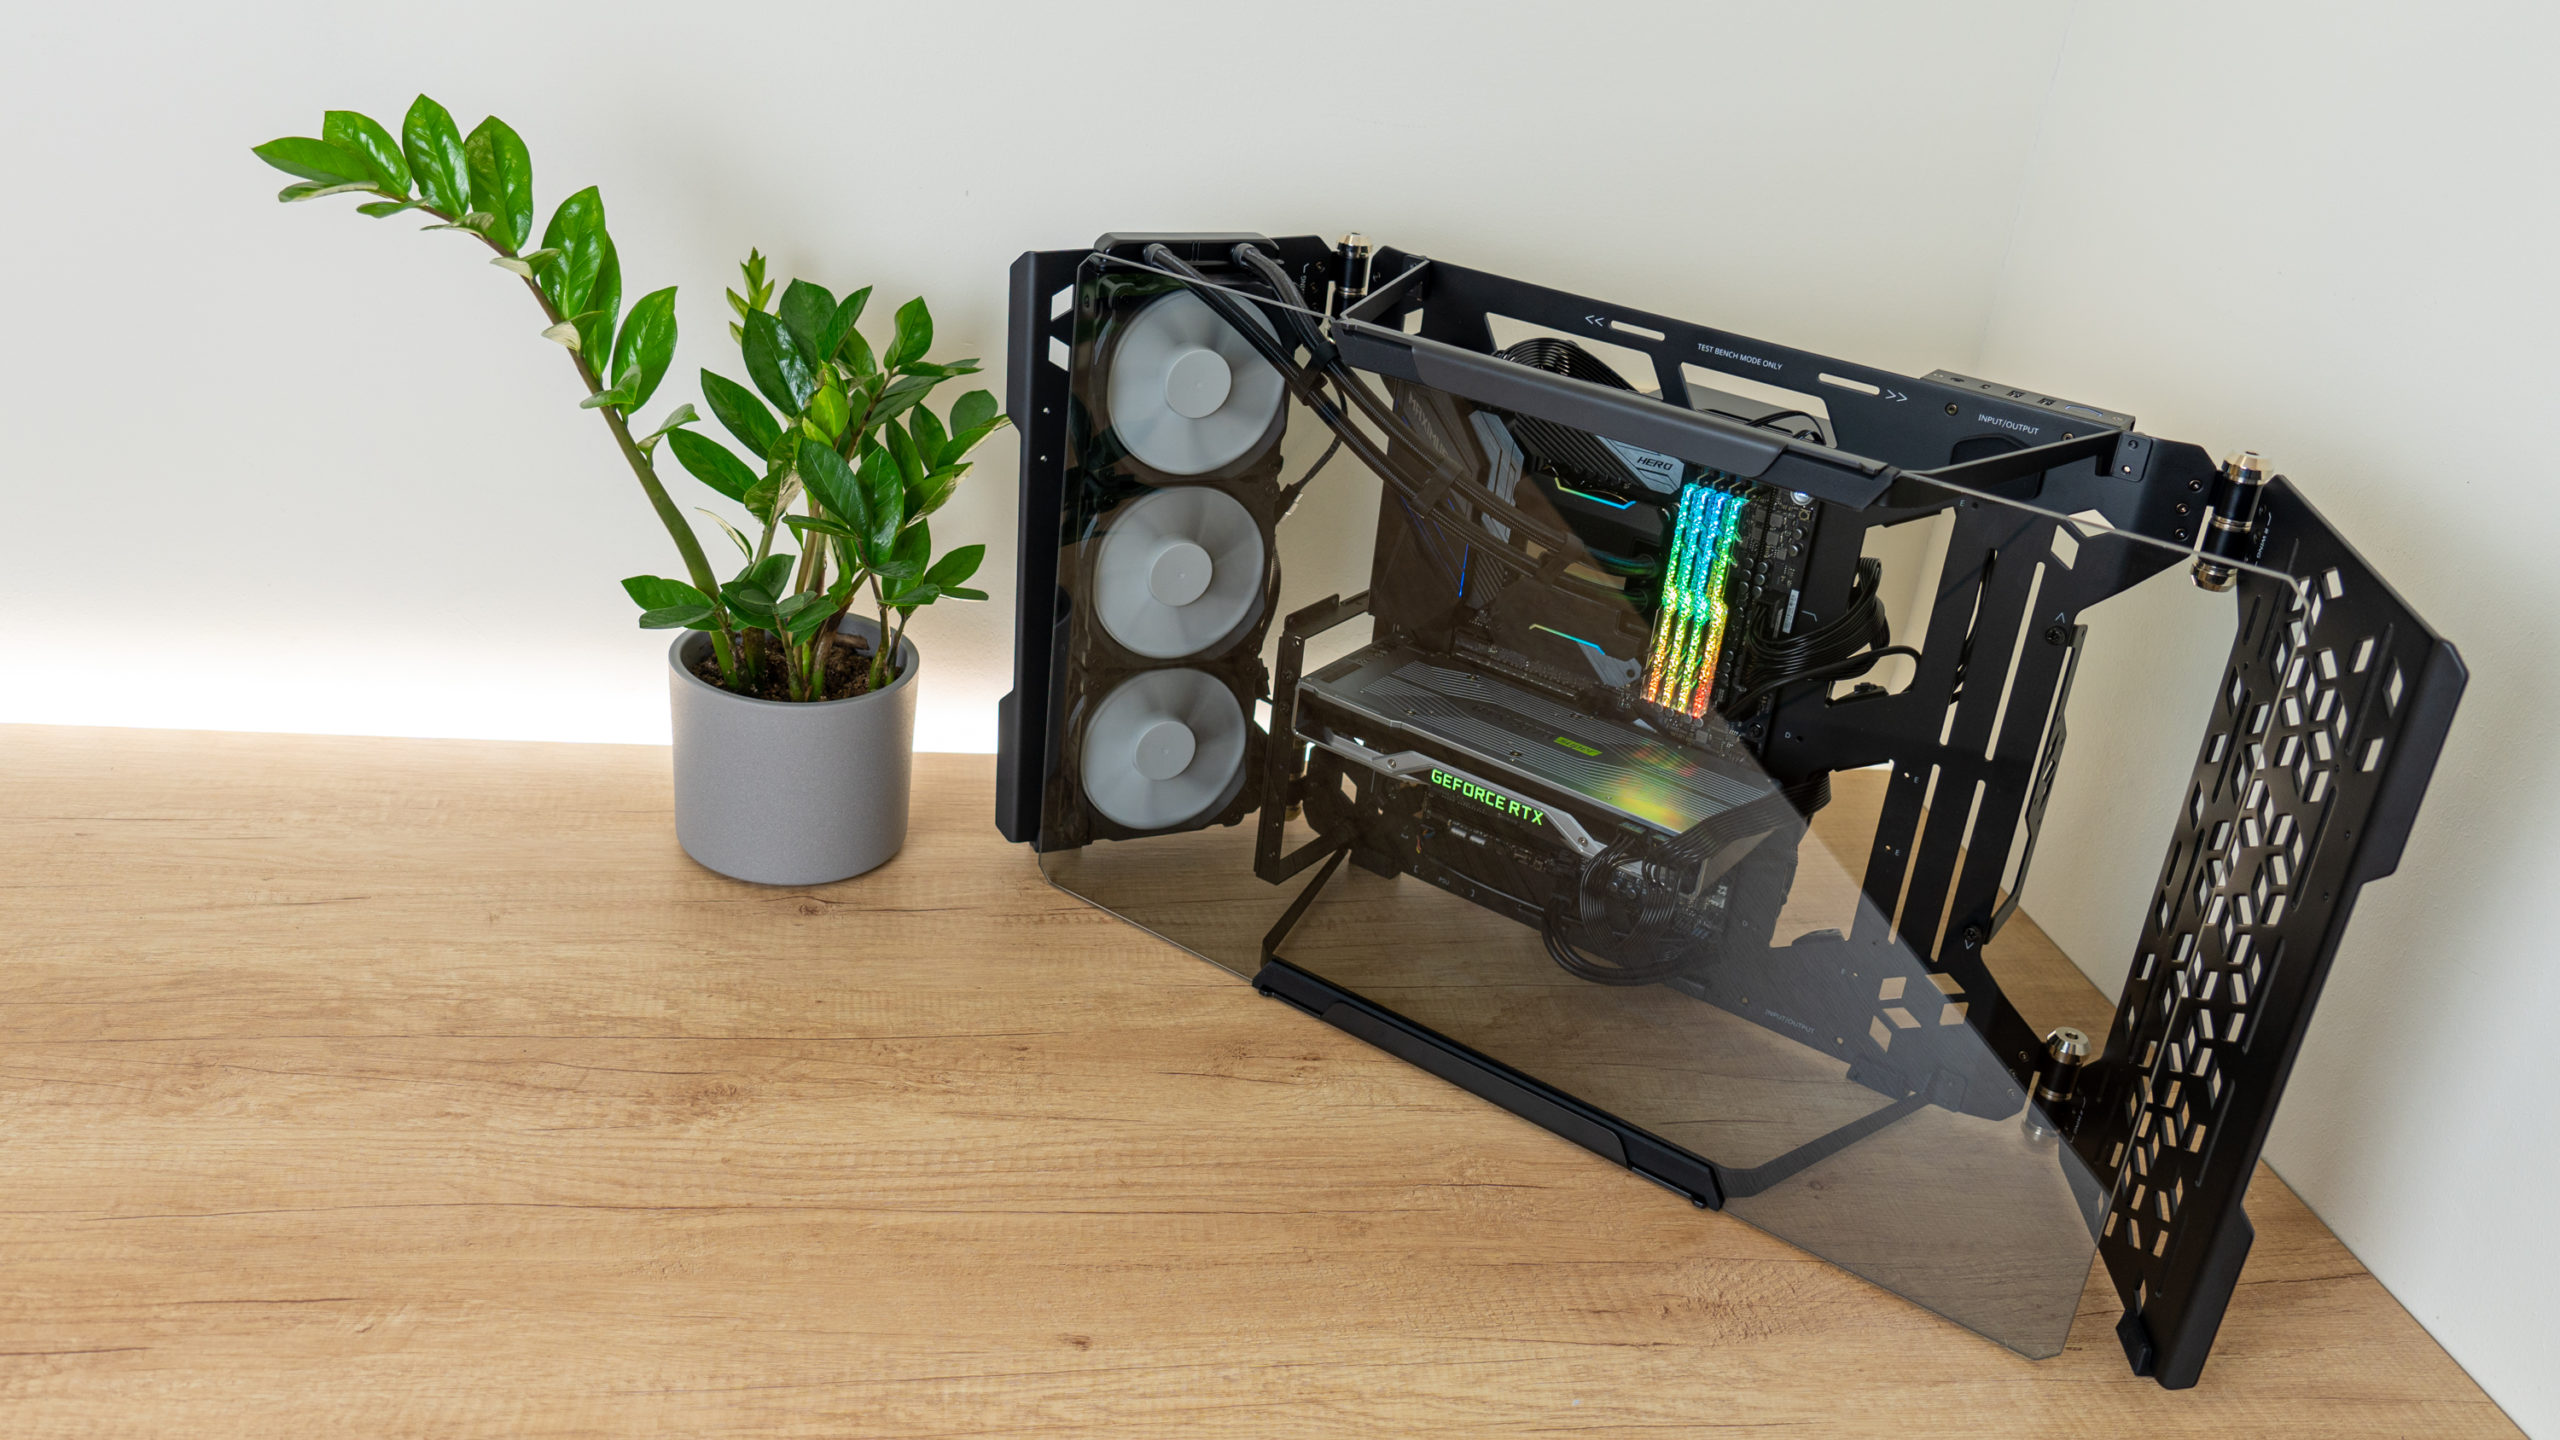 cooler-master-masterframe-700-review:-a-talented-showcase